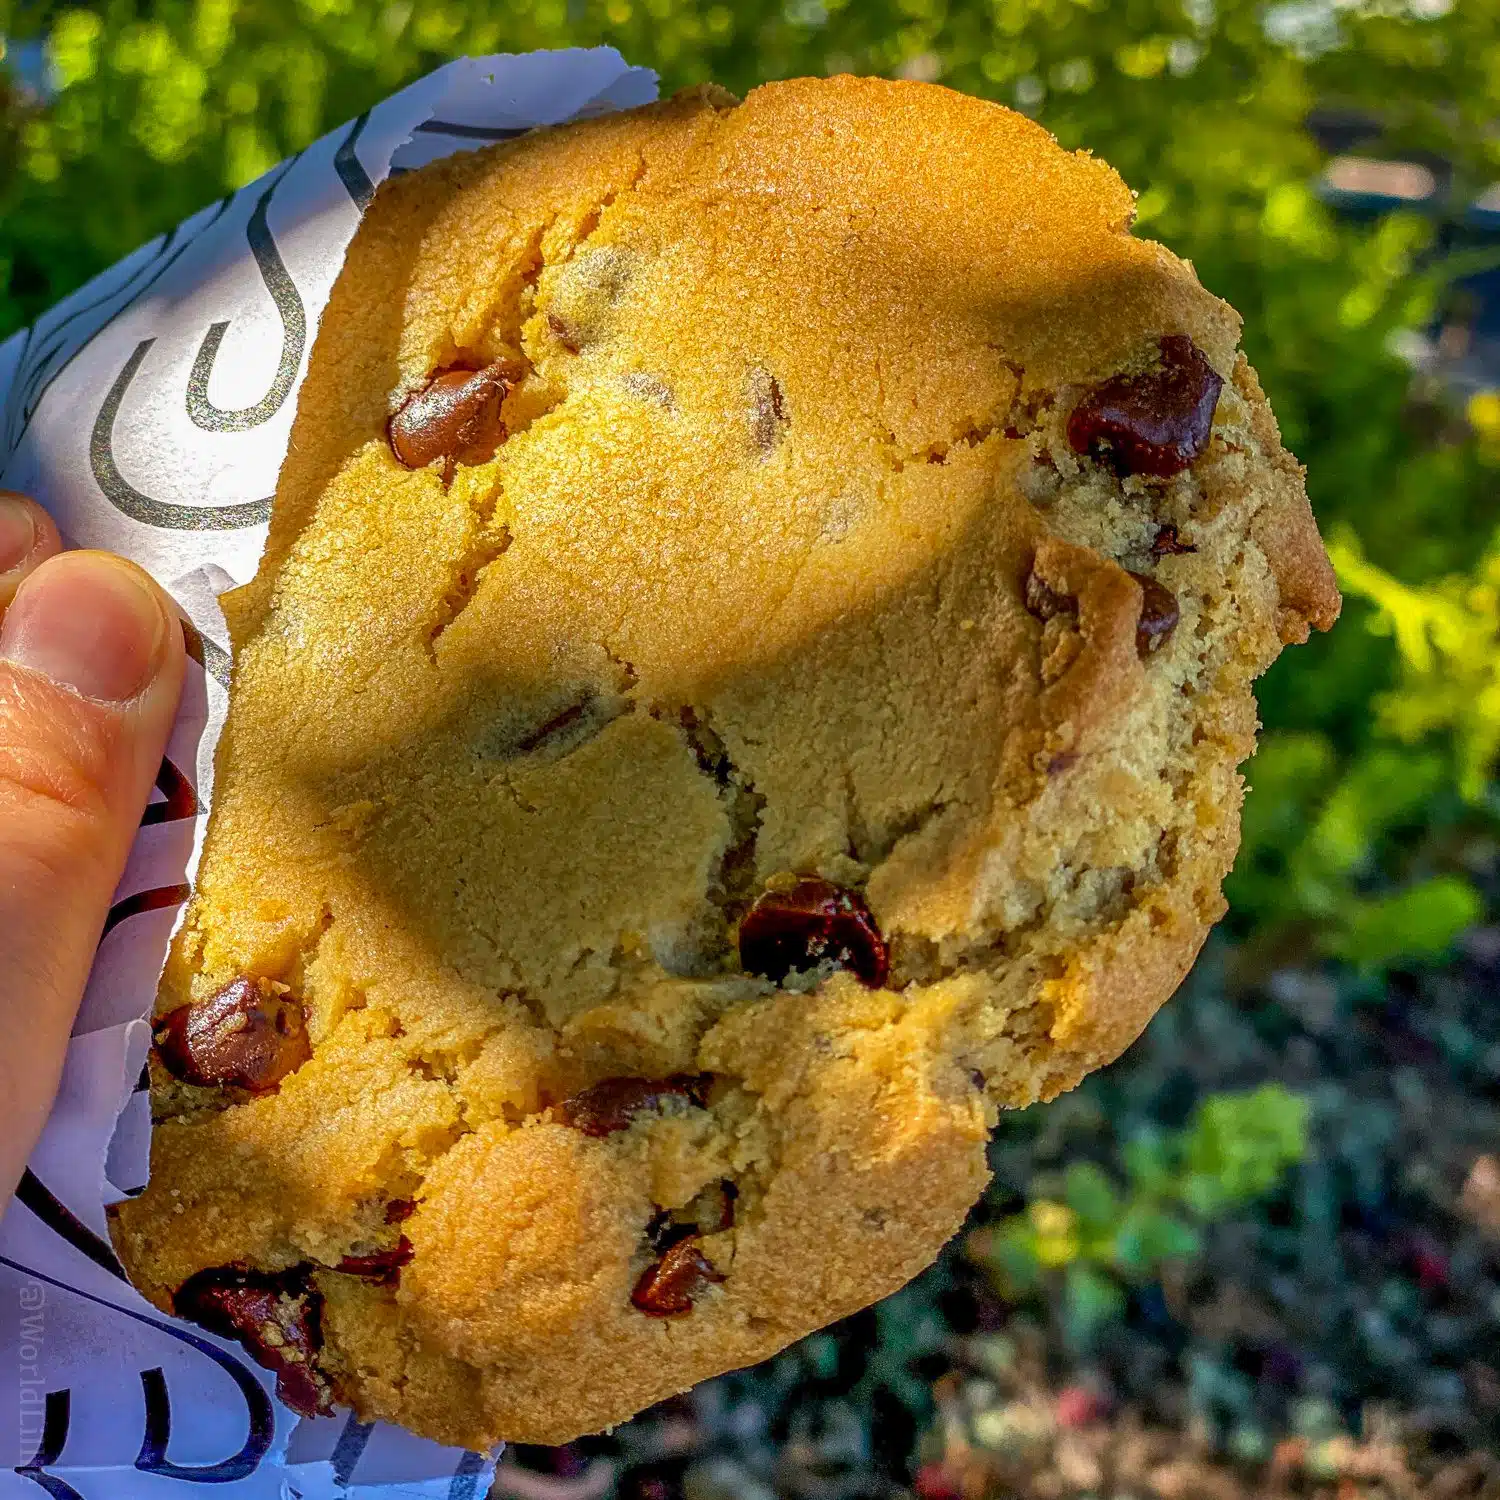 A Sparrow chocolate chip cookie in Bend, OR.